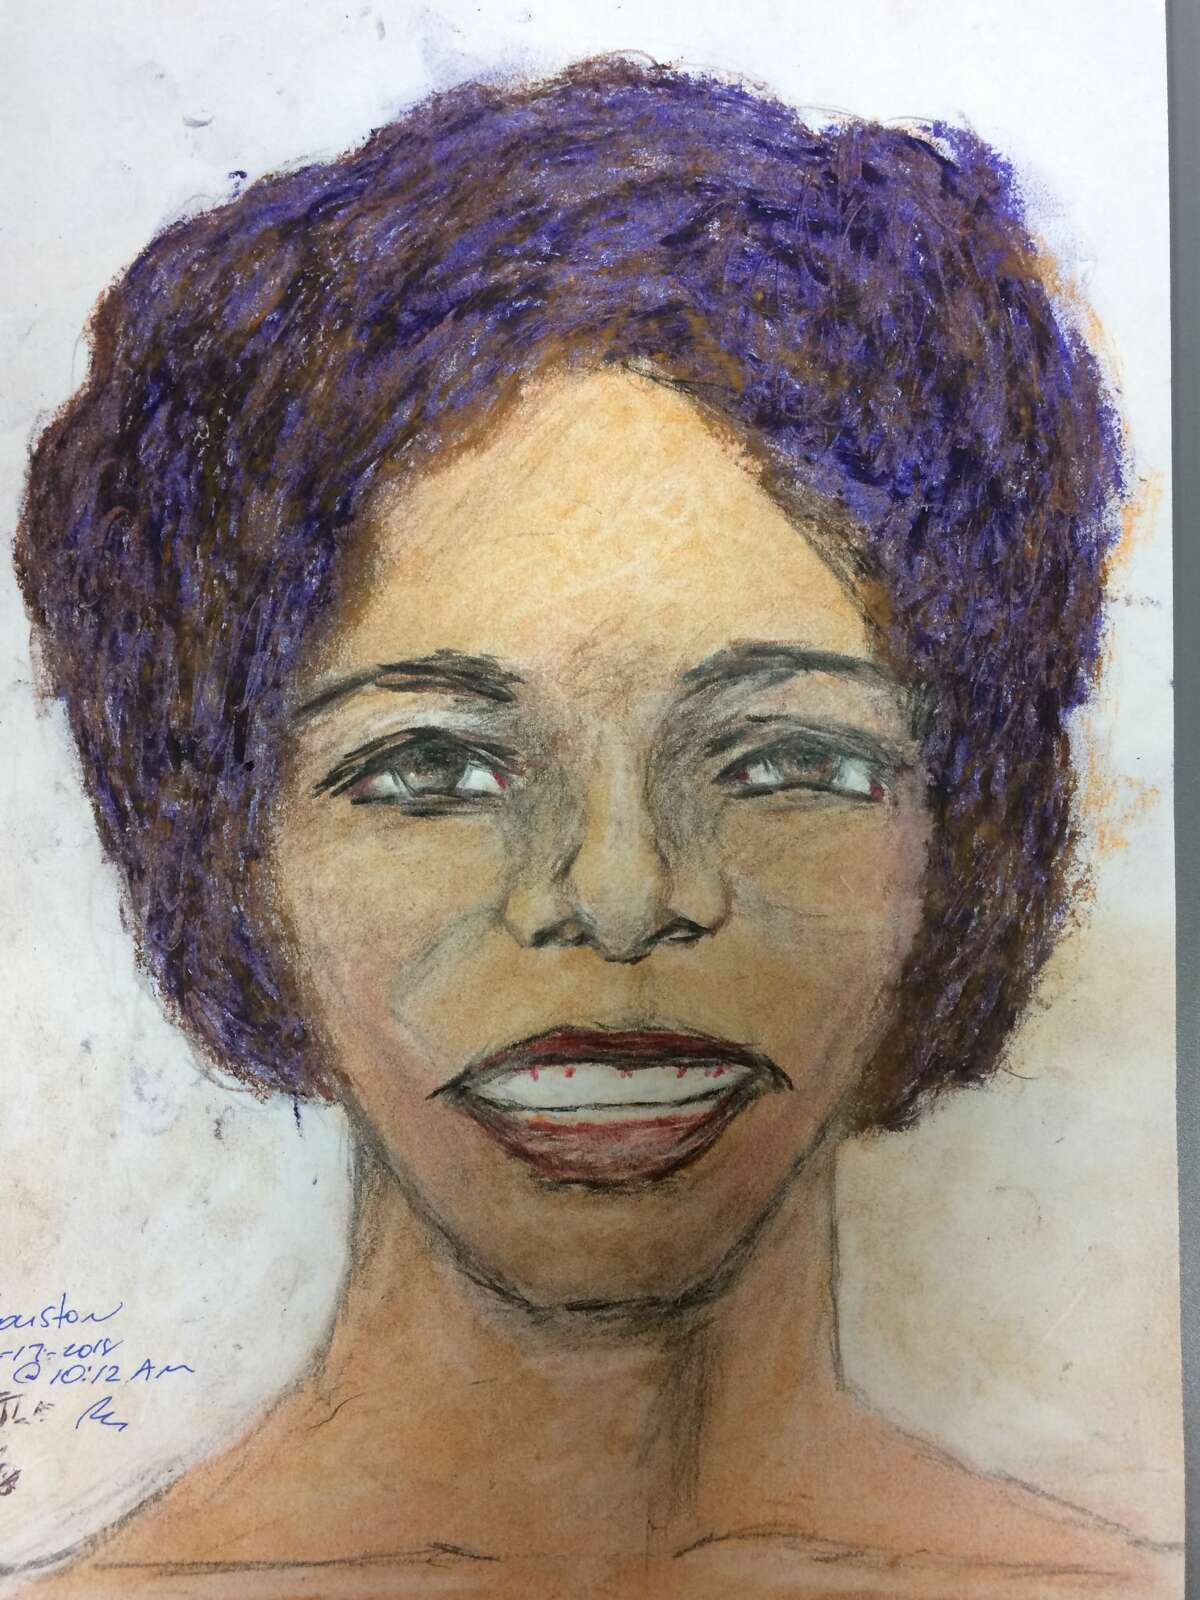 This woman, identified only as a black female between 25-28 years old, was killed by Samuel Little in Houston some time killed between 1976 and 1979 or in 1993, federal officials say.